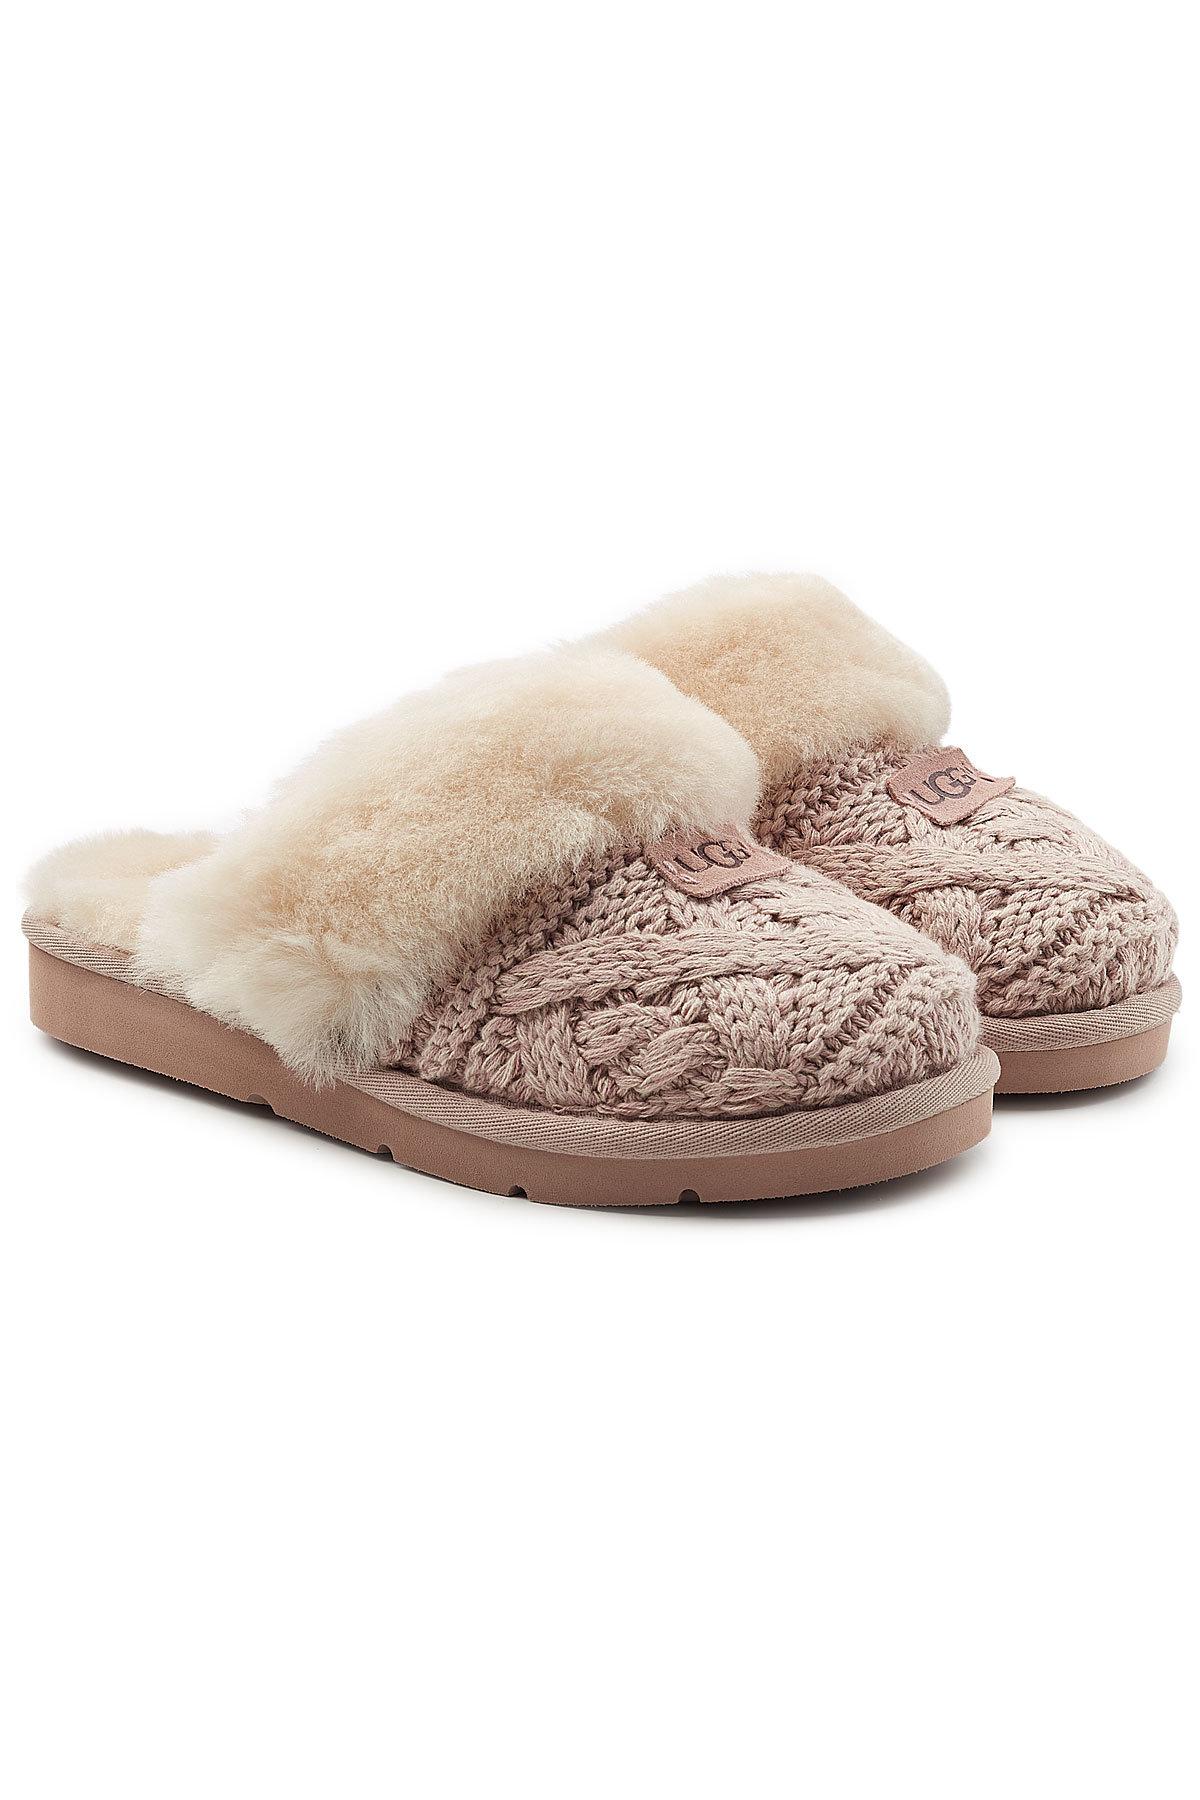 ugg cable knit slippers